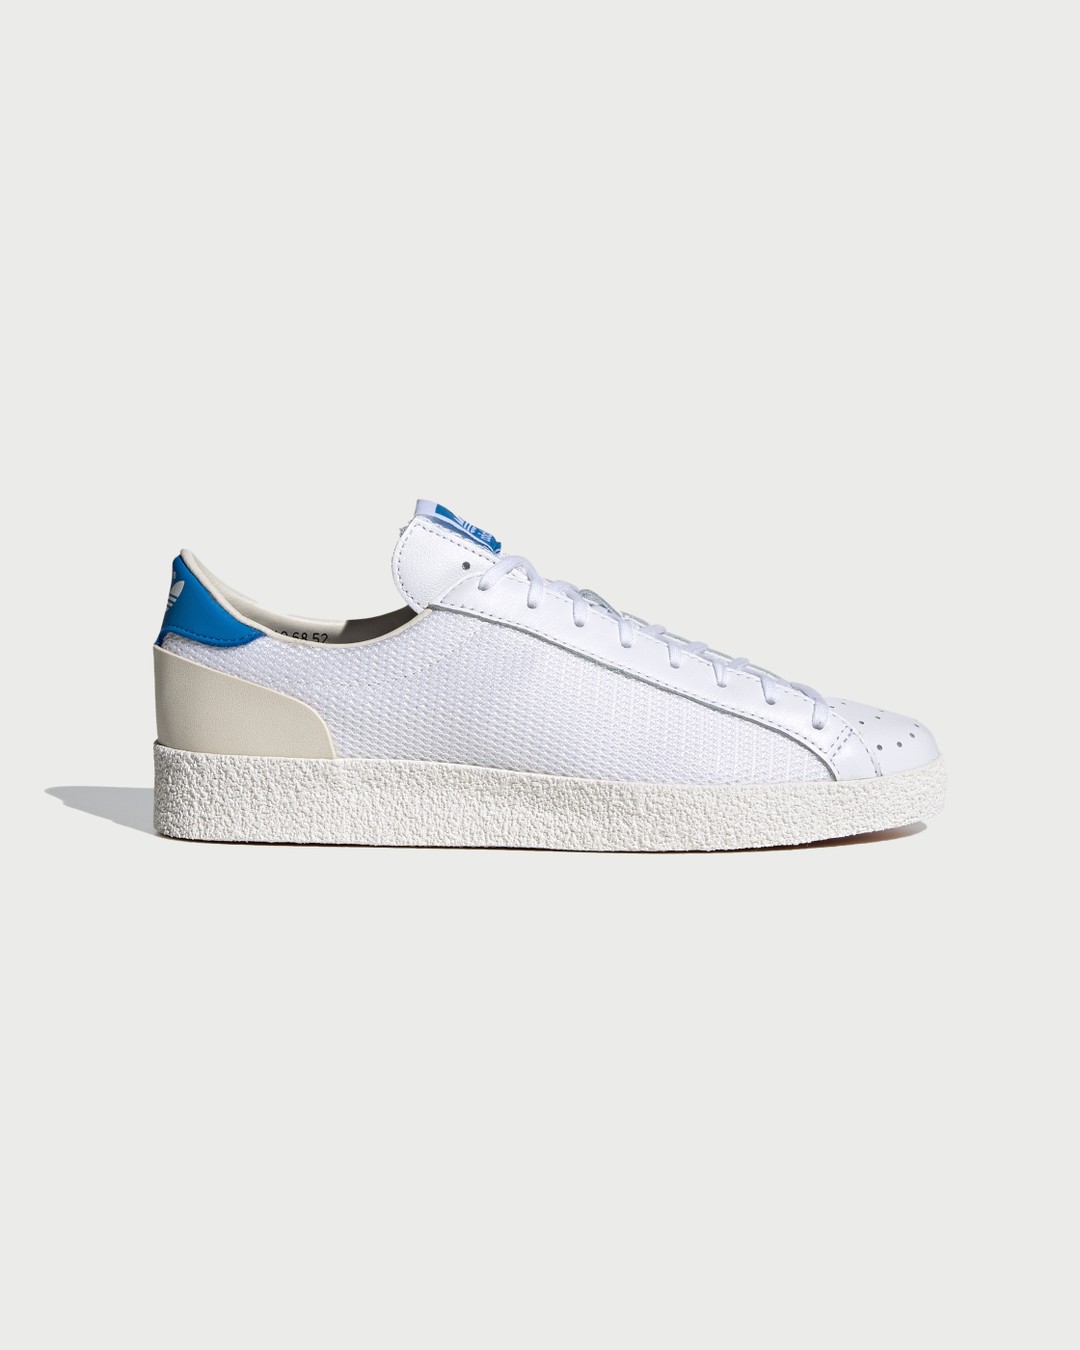 Adidas – Aderley Spezial Off White - Sneakers - White - Image 1